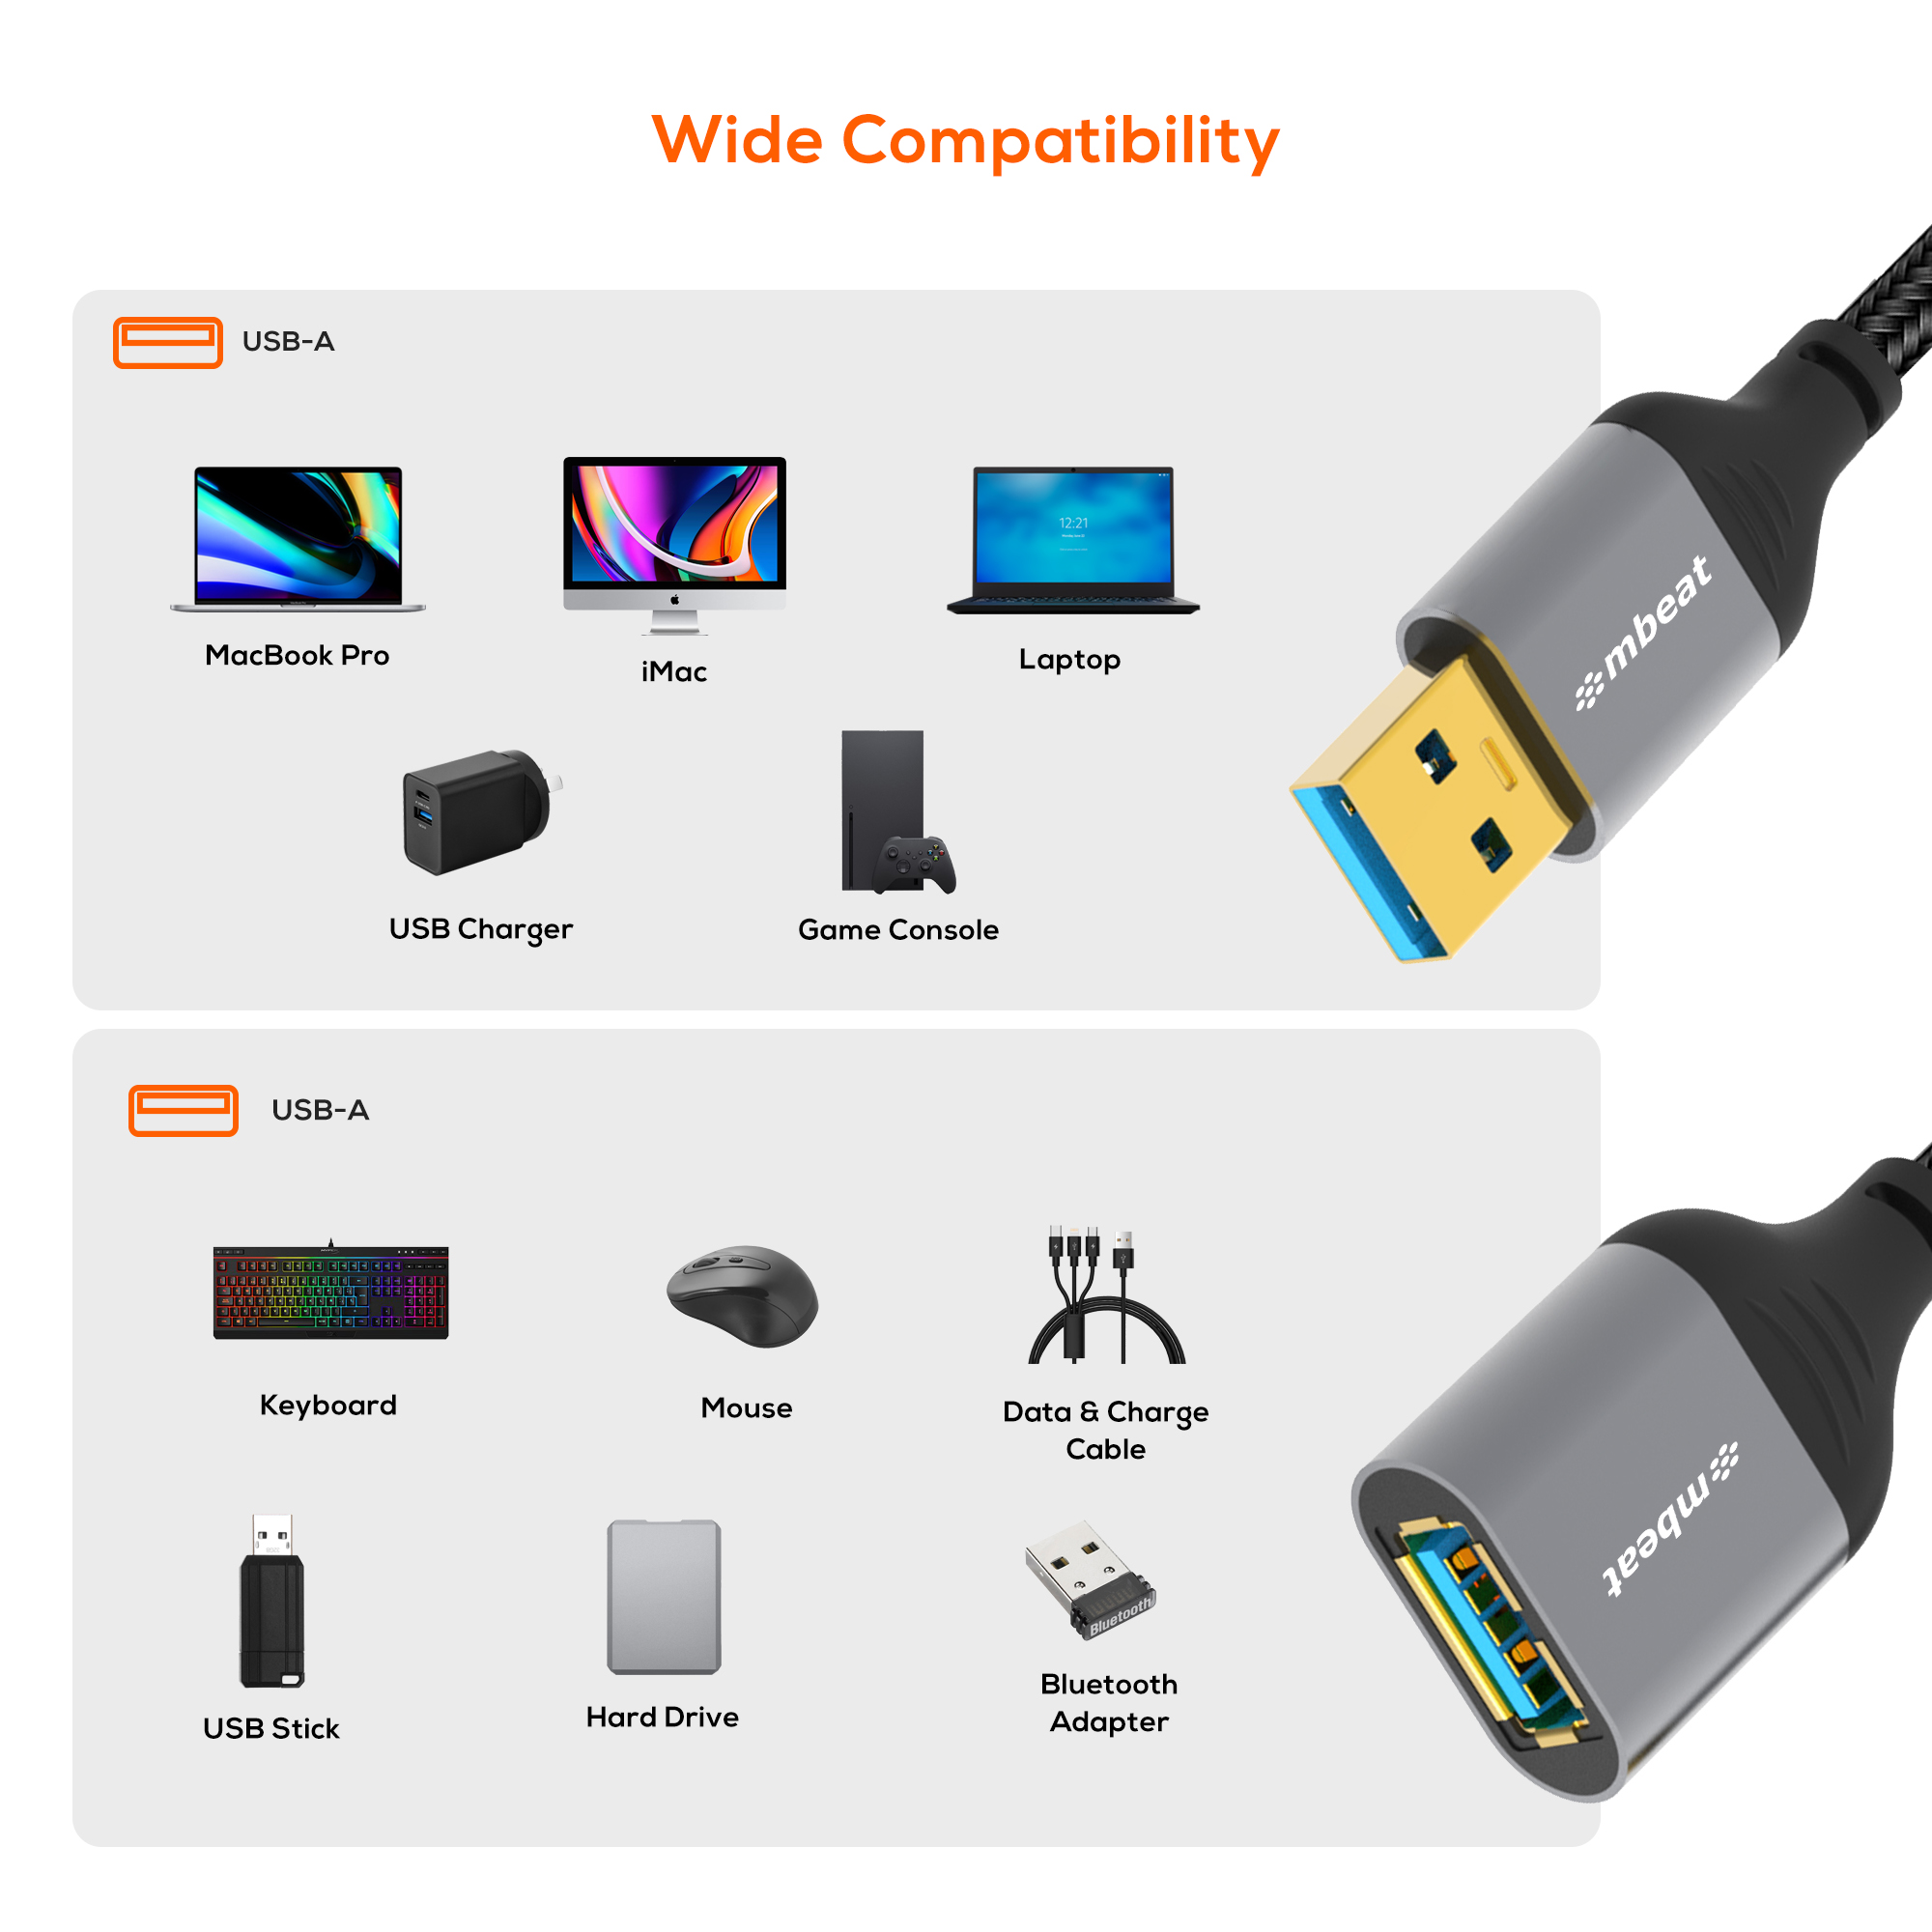 A large marketing image providing additional information about the product mbeat Tough Link USB 3.0 to USB 3.0 Extension Cable - 1.8m - Additional alt info not provided